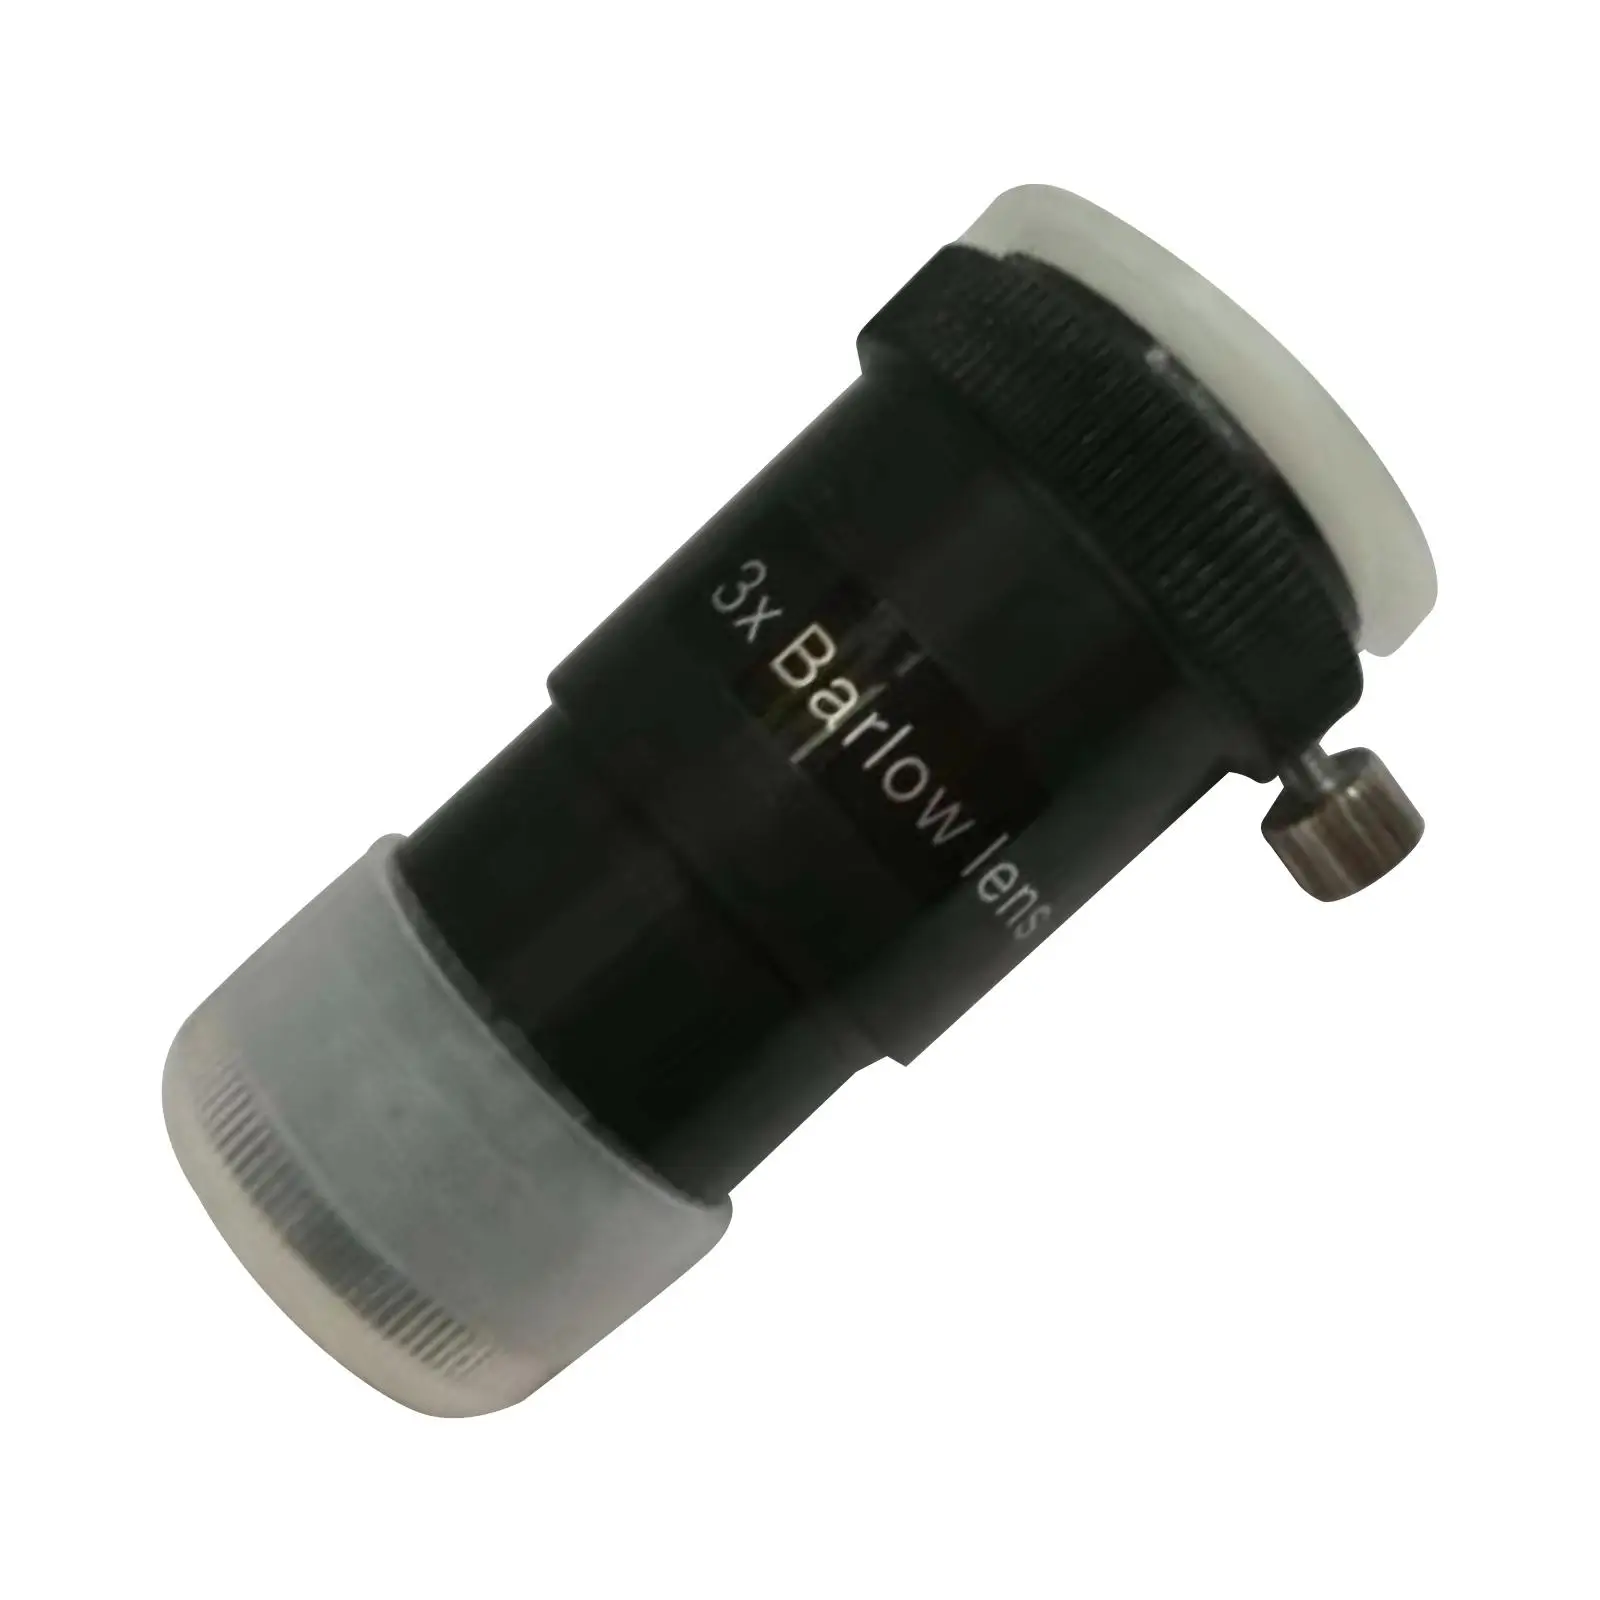 `` 3 Fully Multi Coated Film with M42 Thread for Astronomy Telescope Eyepiece, Optical Glass